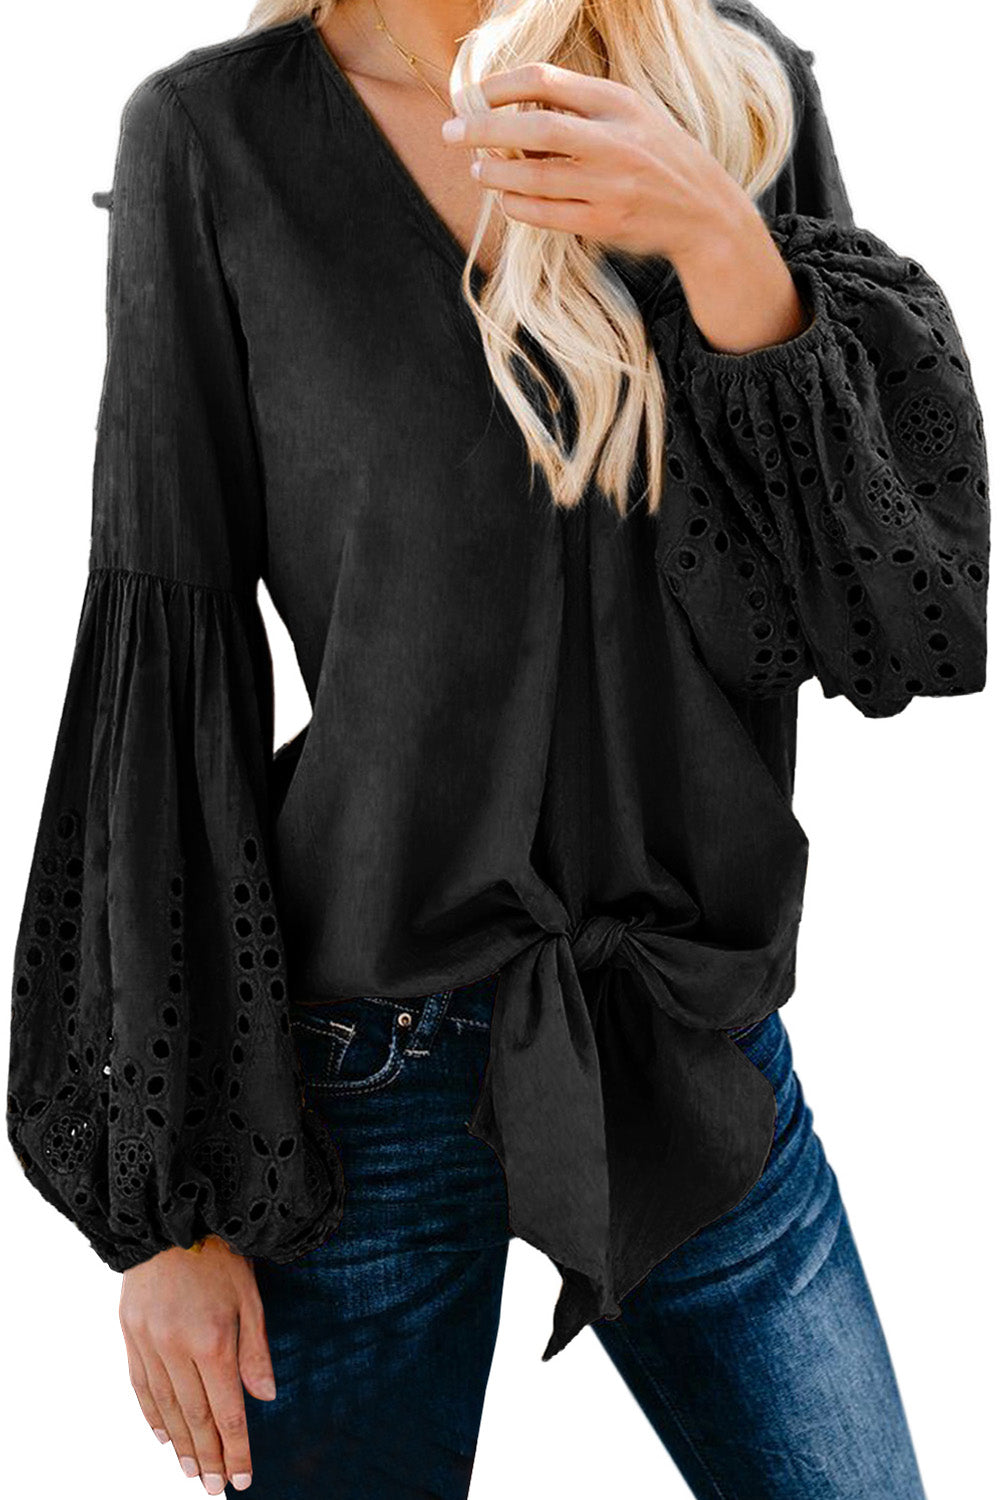 Black Women's Casual Autumn Balloon Sleeve Tie Top V Neck Blouse Loose Shirts LC252264-2